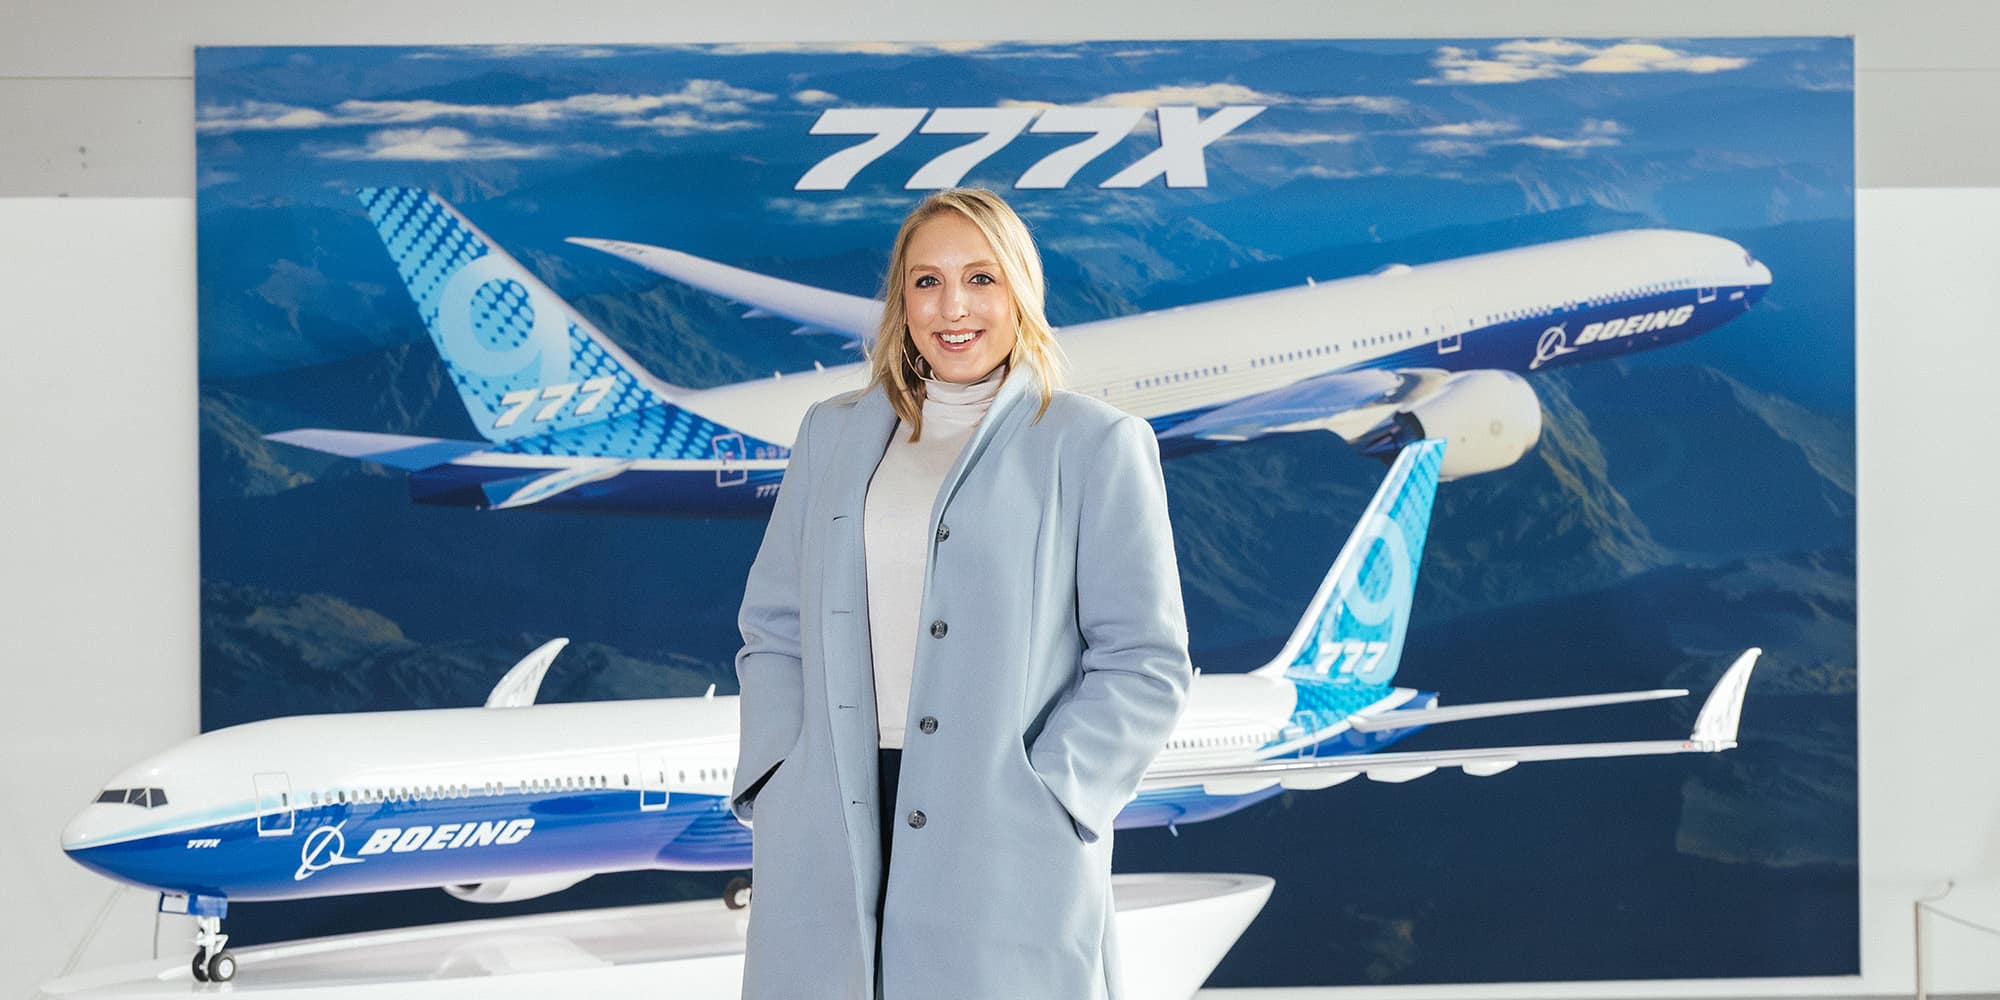 Rachelle Strong, wearing a light blue trench coat and a white turtleneck, stands in front of a backdrop showing several Boeing 777Xs flying over mountains.